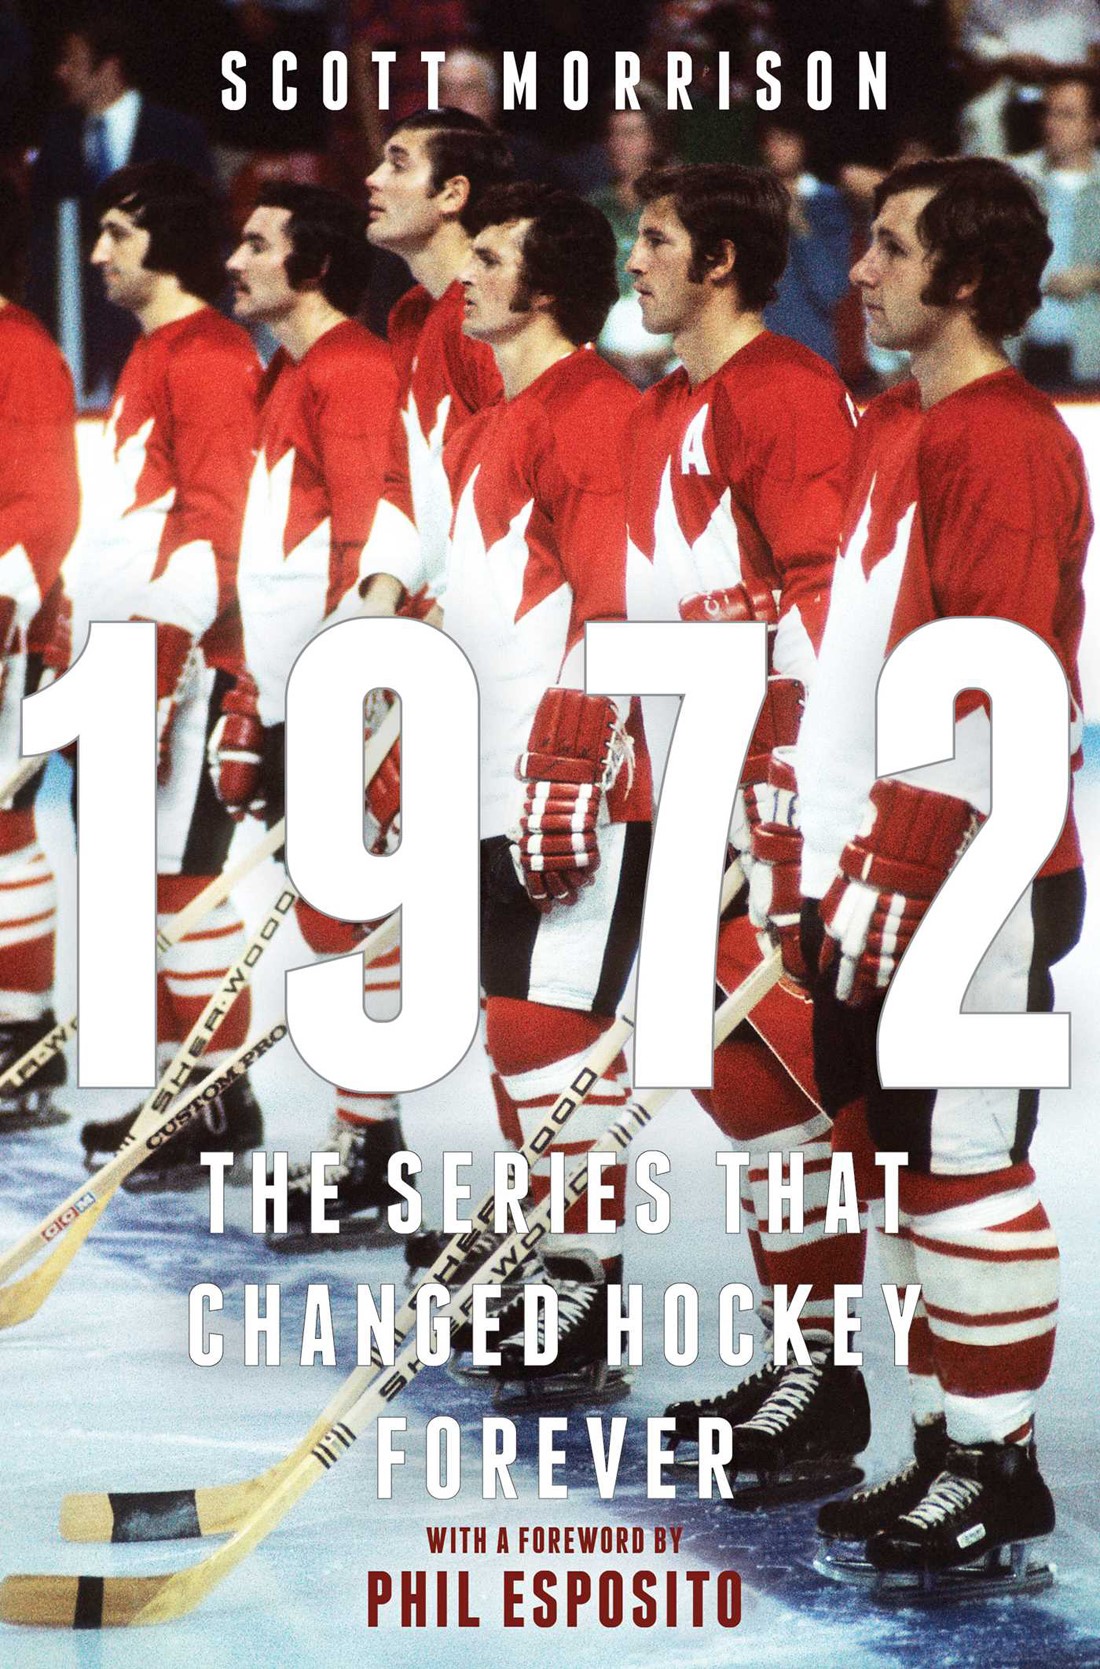 1972 Summit Series reamins epic memory for many Canadians 